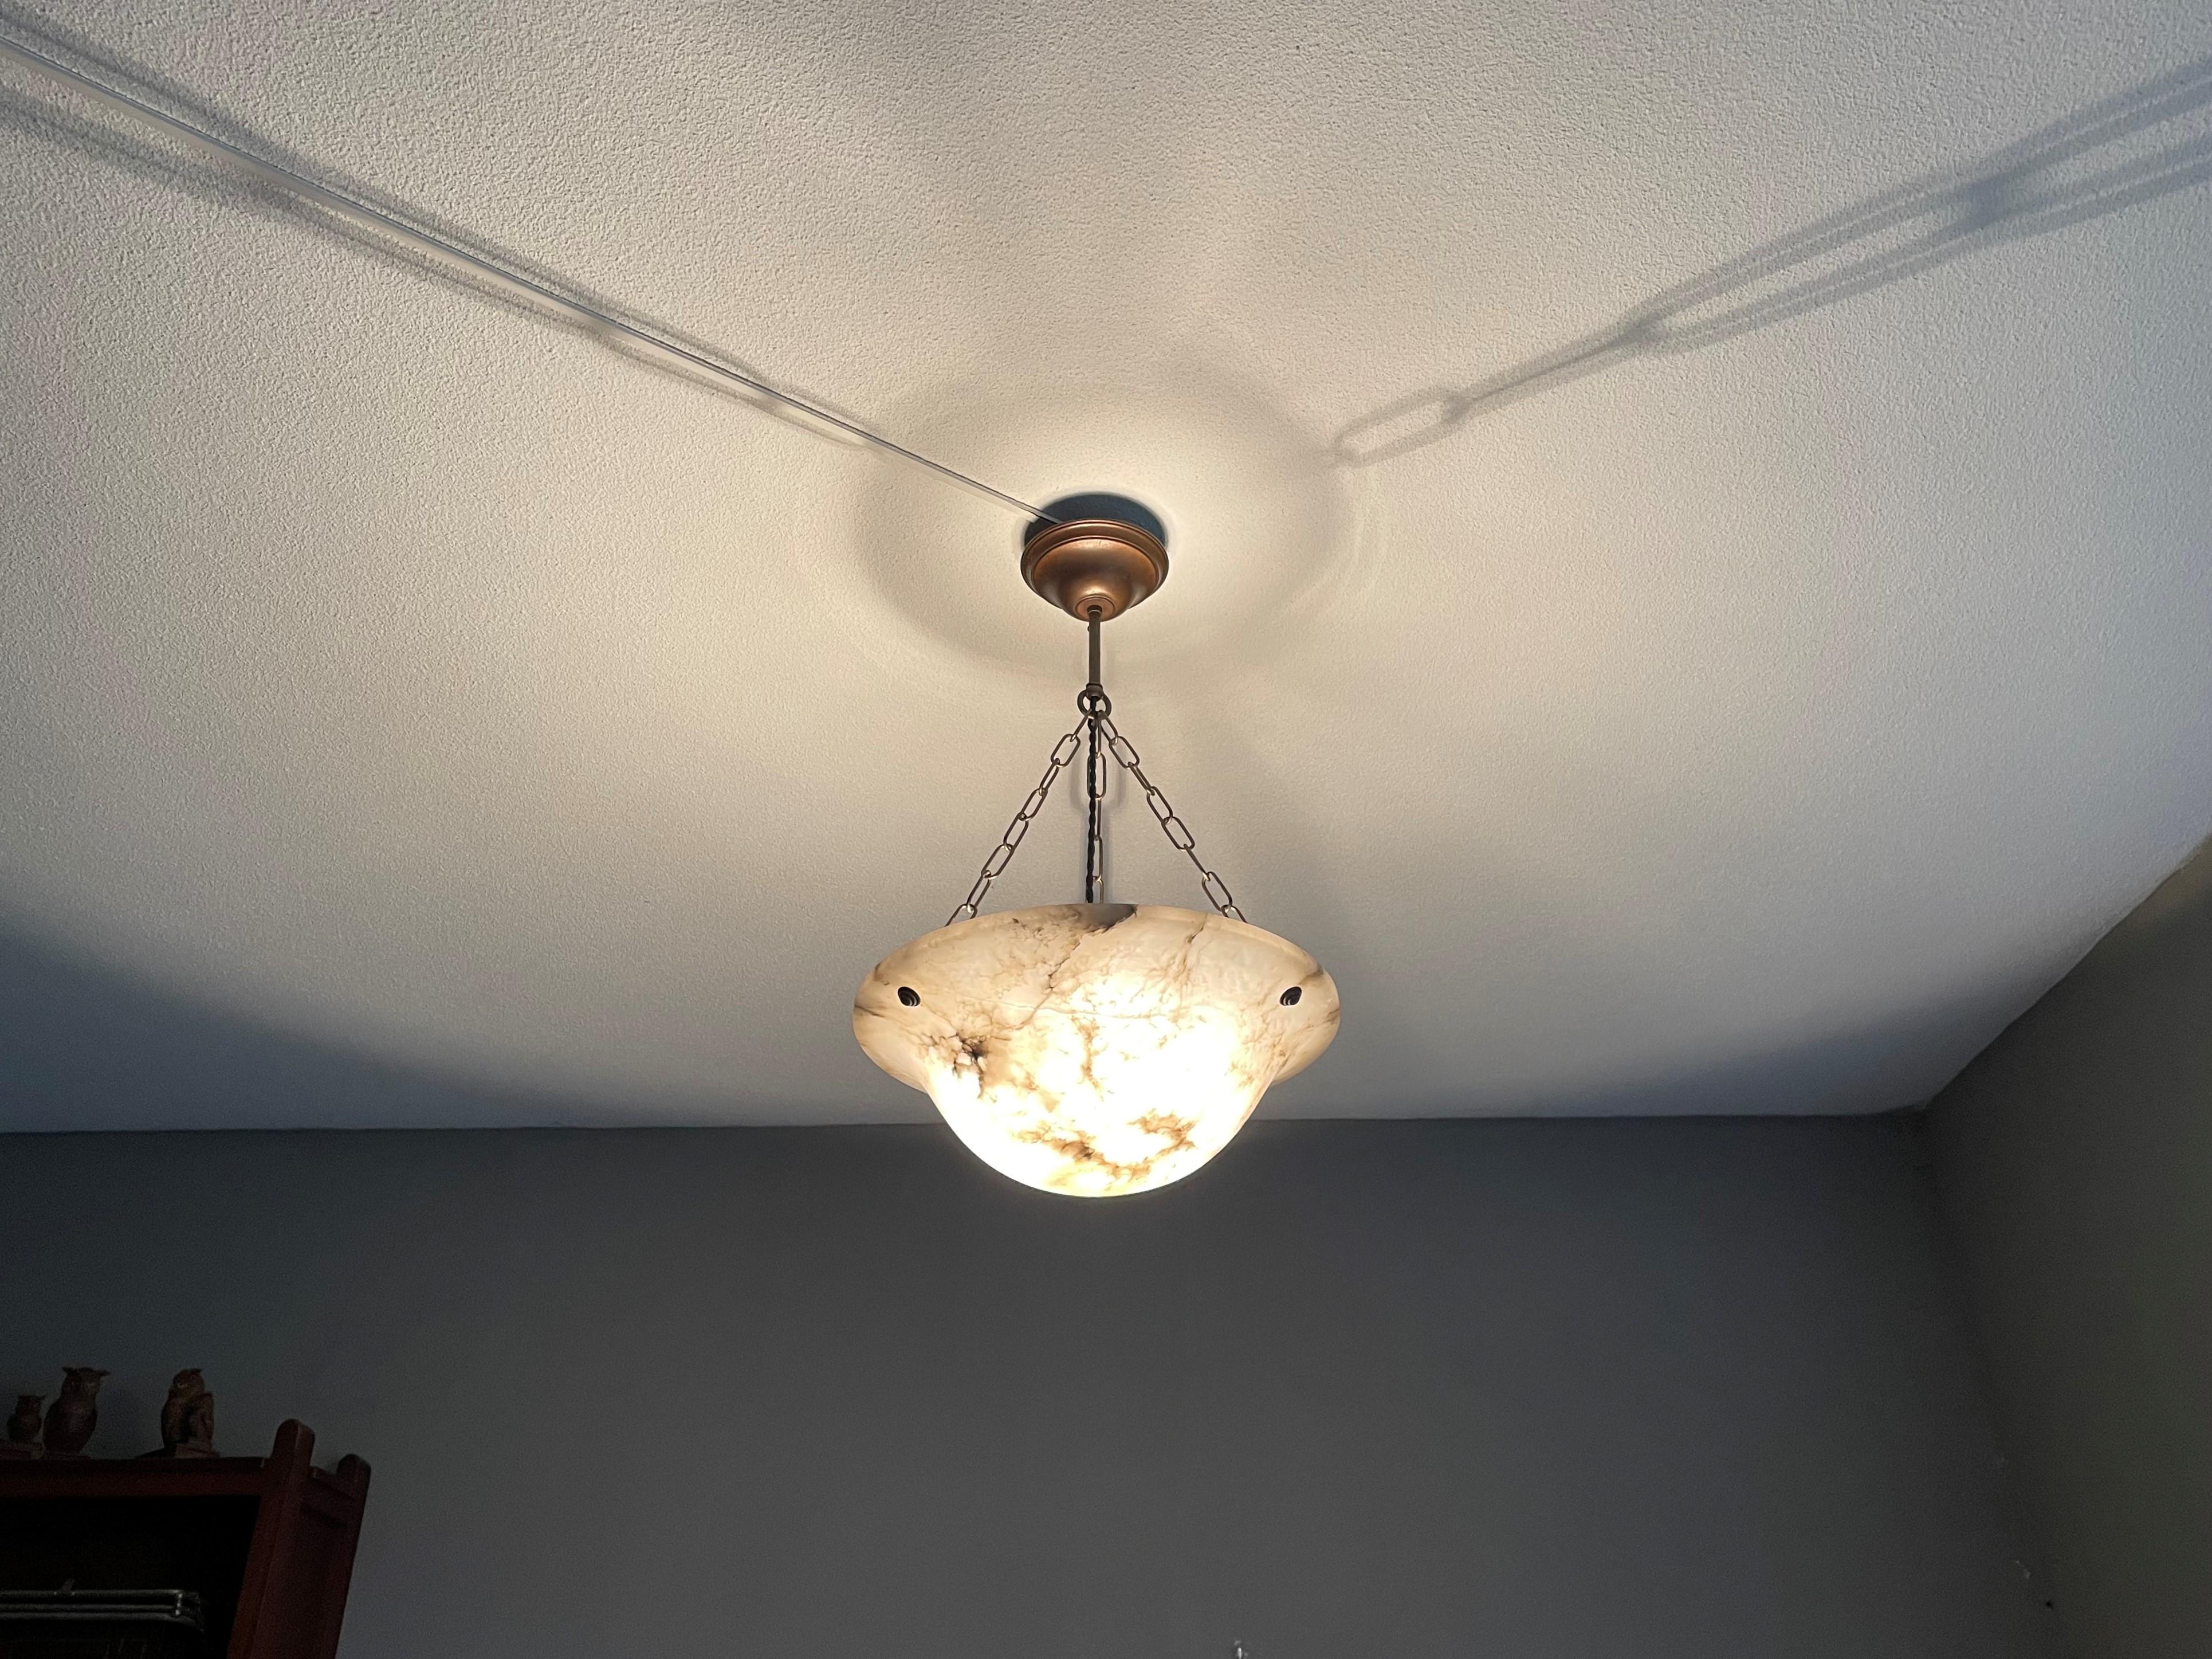 Marvelous antique light fixture for an entry hall, bedroom or any other room.

With early 20th century light fixtures being one of our specialities, we love finding timeless light fixtures that we know will look great in various interiors. This